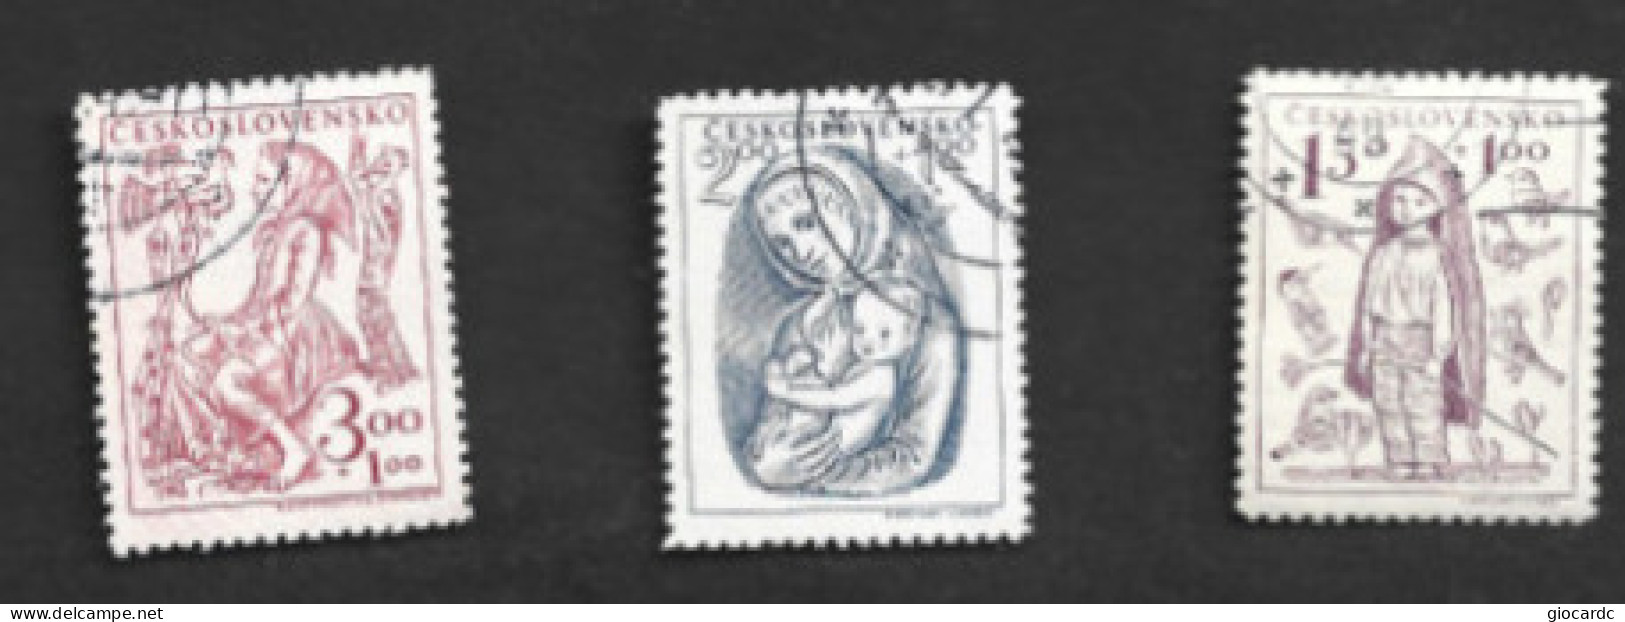 CECOSLOVACCHIA (CZECHOSLOVAKIA) - SG 532.534  - 1948 CHILD WELFARE (COMPLET SET OF 3) - USED - Used Stamps